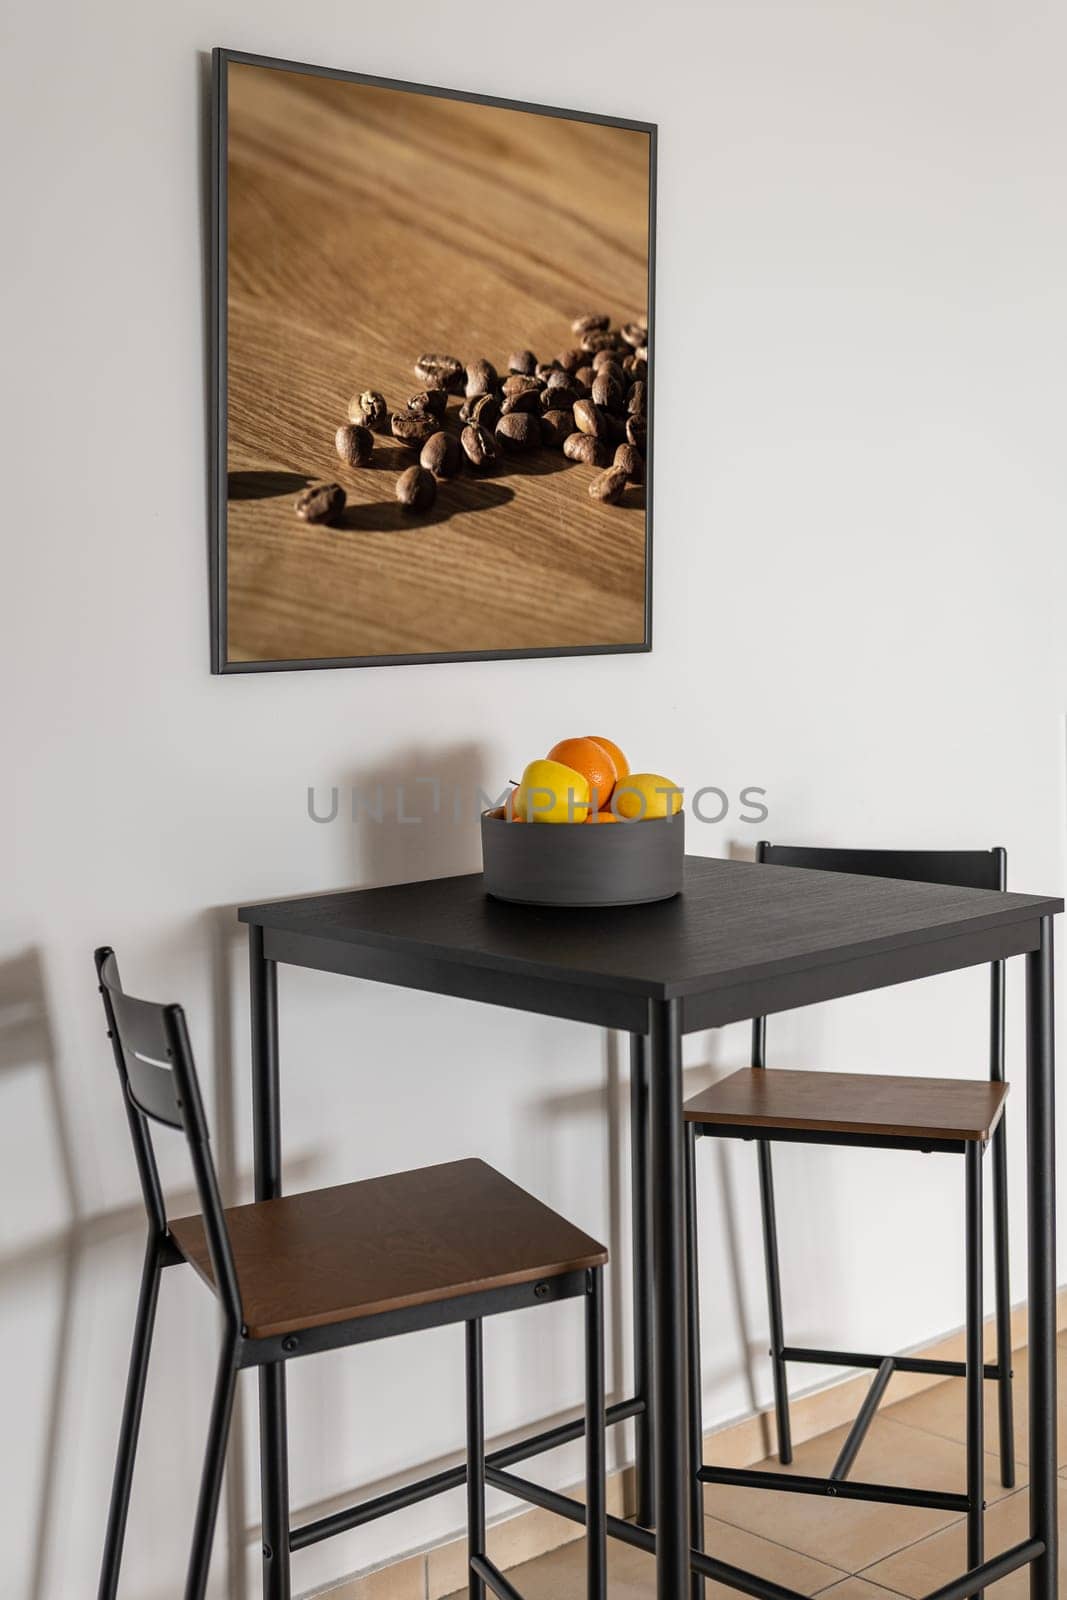 High bar table with chairs and fruits in bowl near white wall by apavlin